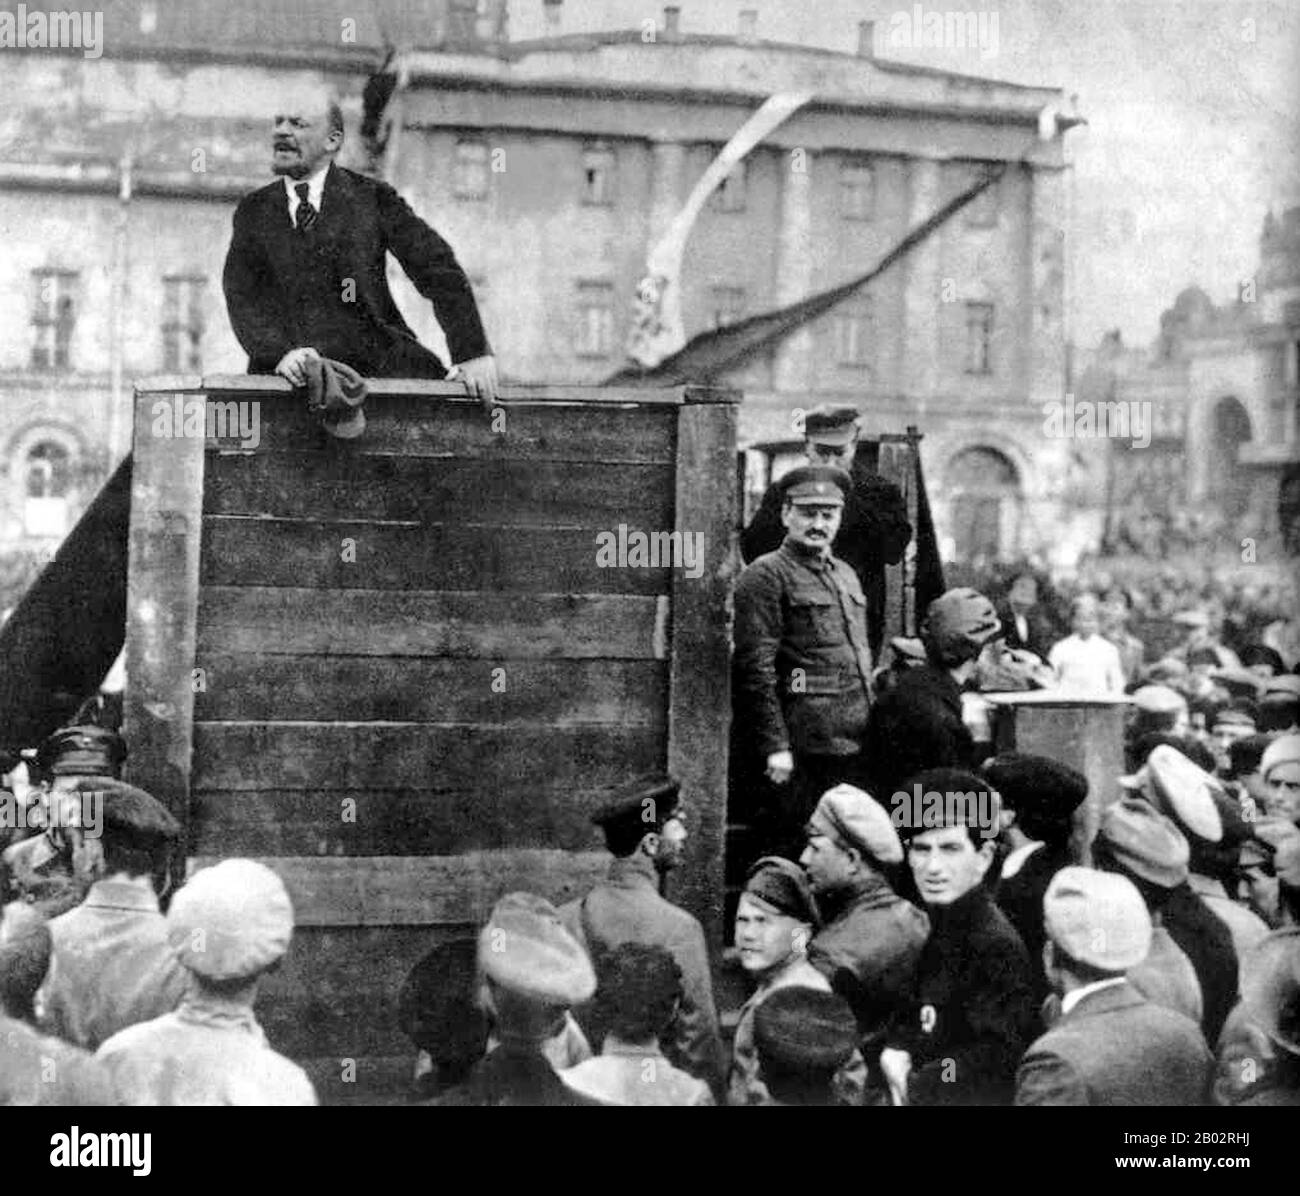 Lenin speaking at an assemble of Red Army troops bound for the Polish front. Photograph taken in Sverdlov Square, Moscow, on 5 May 1920.  This is the original image with Trotsky and Kamenev standing on the steps of the platform; later versions produced under Stalin's administration had them removed. Stock Photo